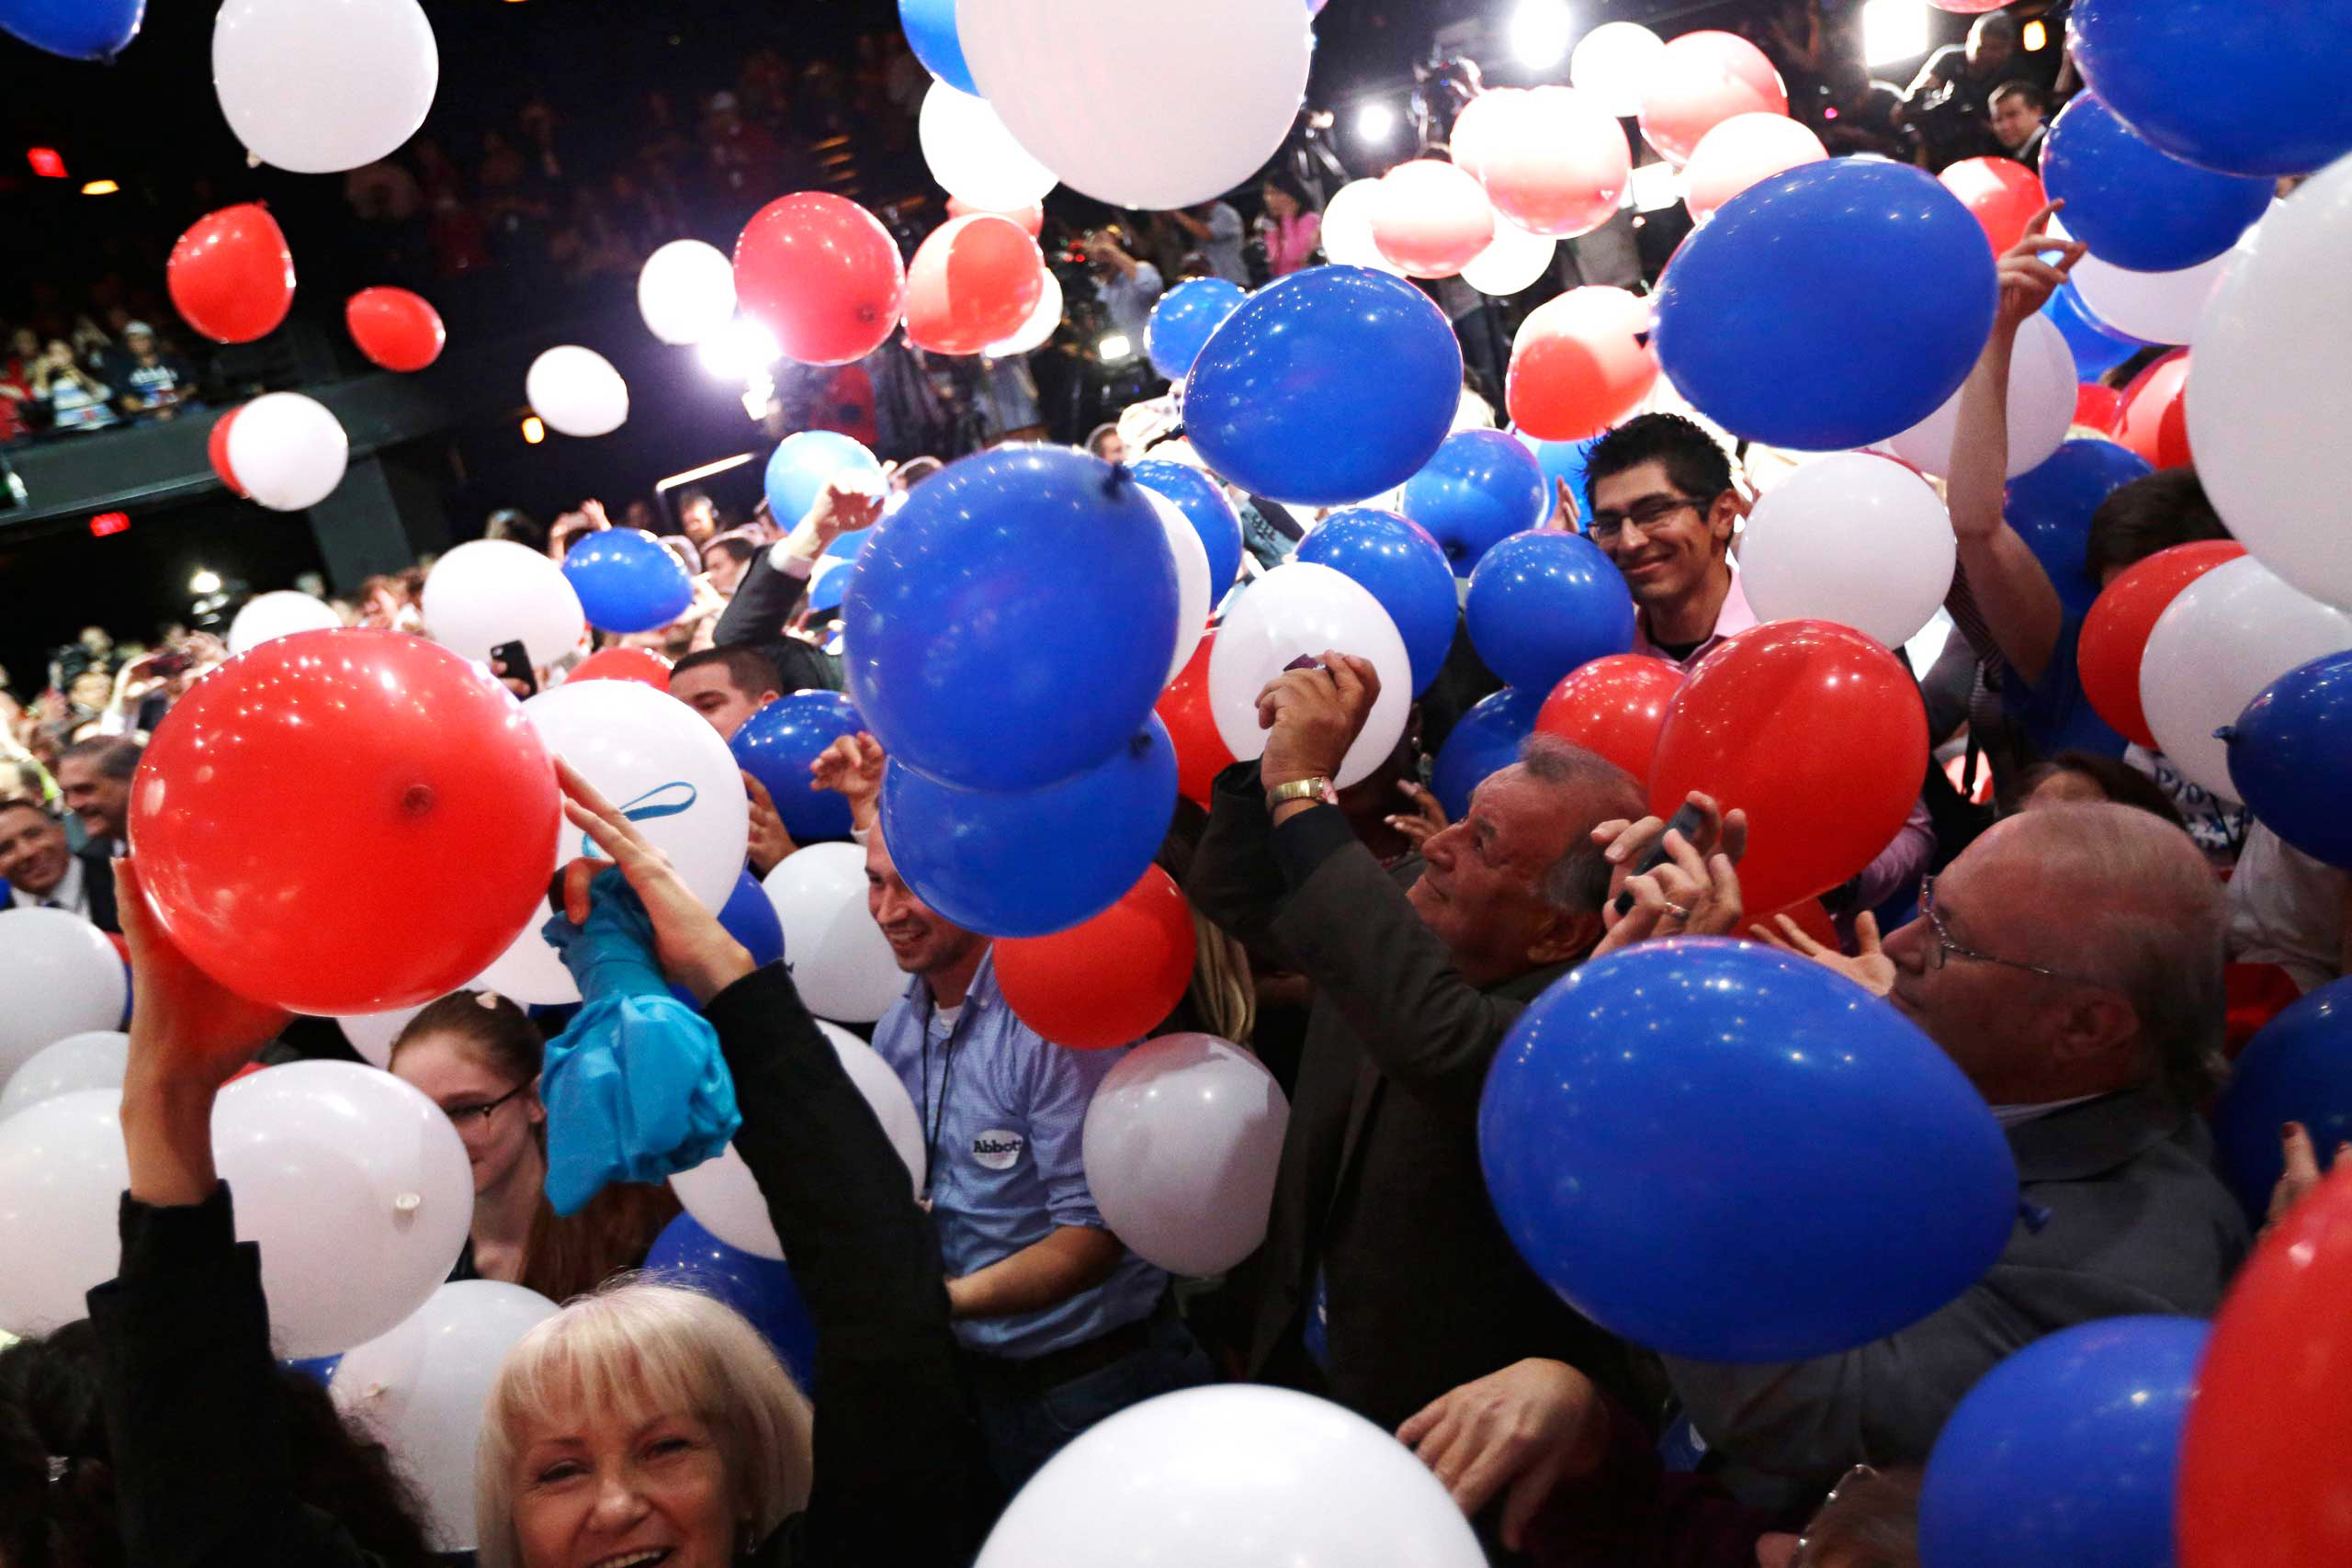 Supporters cheer as balloons fall after Texas Attorney General and Republican candidate for governor Greg Abbott's victory speech in Austin on Nov. 4, 2014. (David J. Phillip—AP)